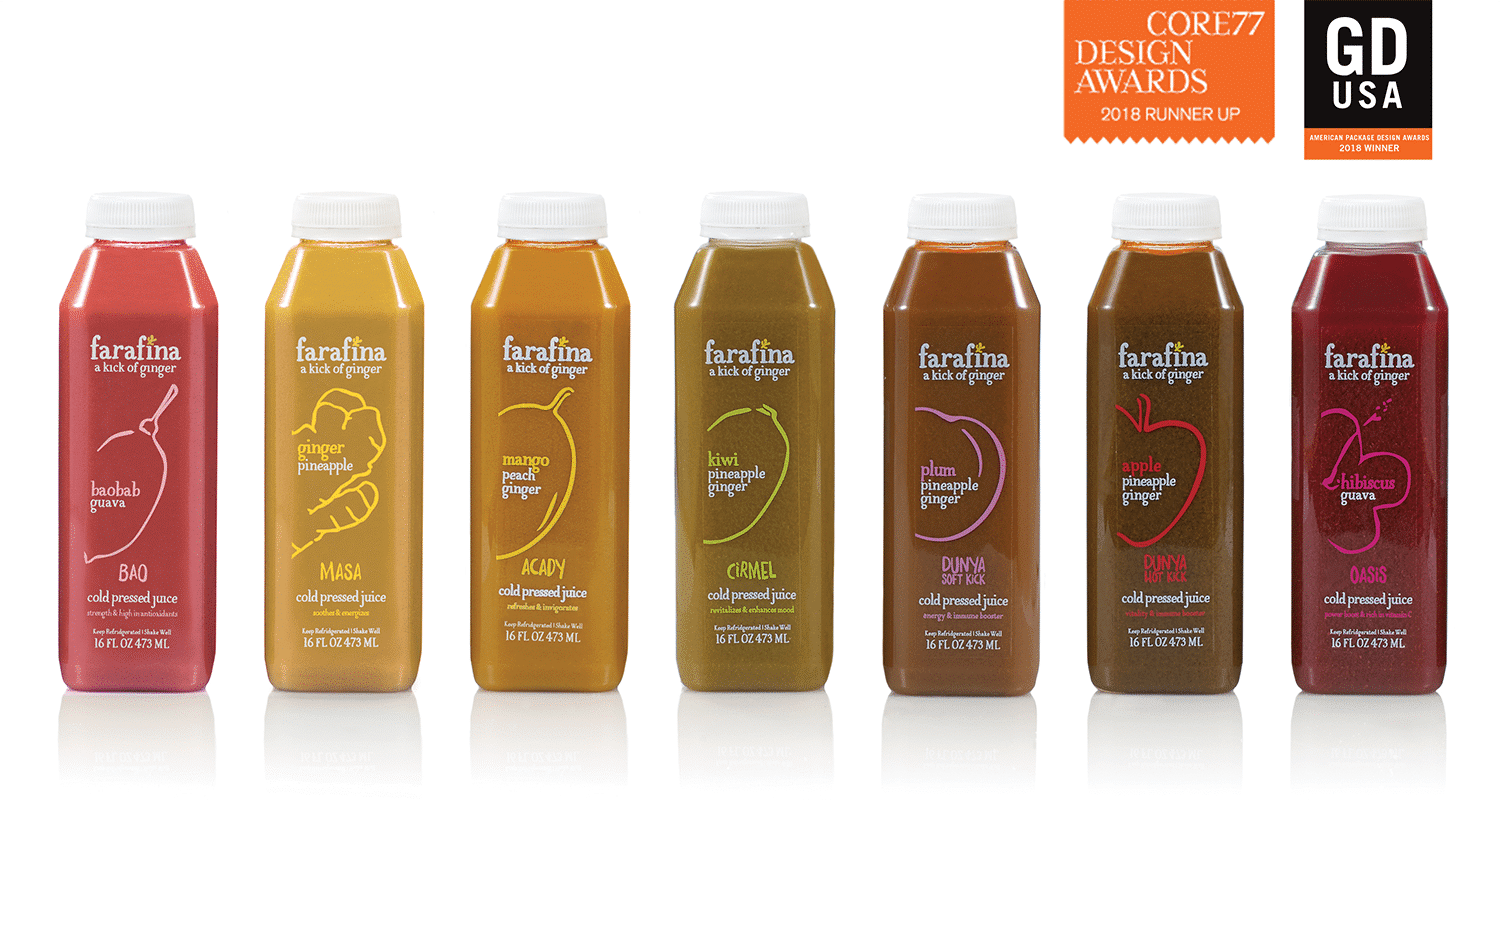 Won a packaging competition: Core 77 Package Design Award for Farafina juices